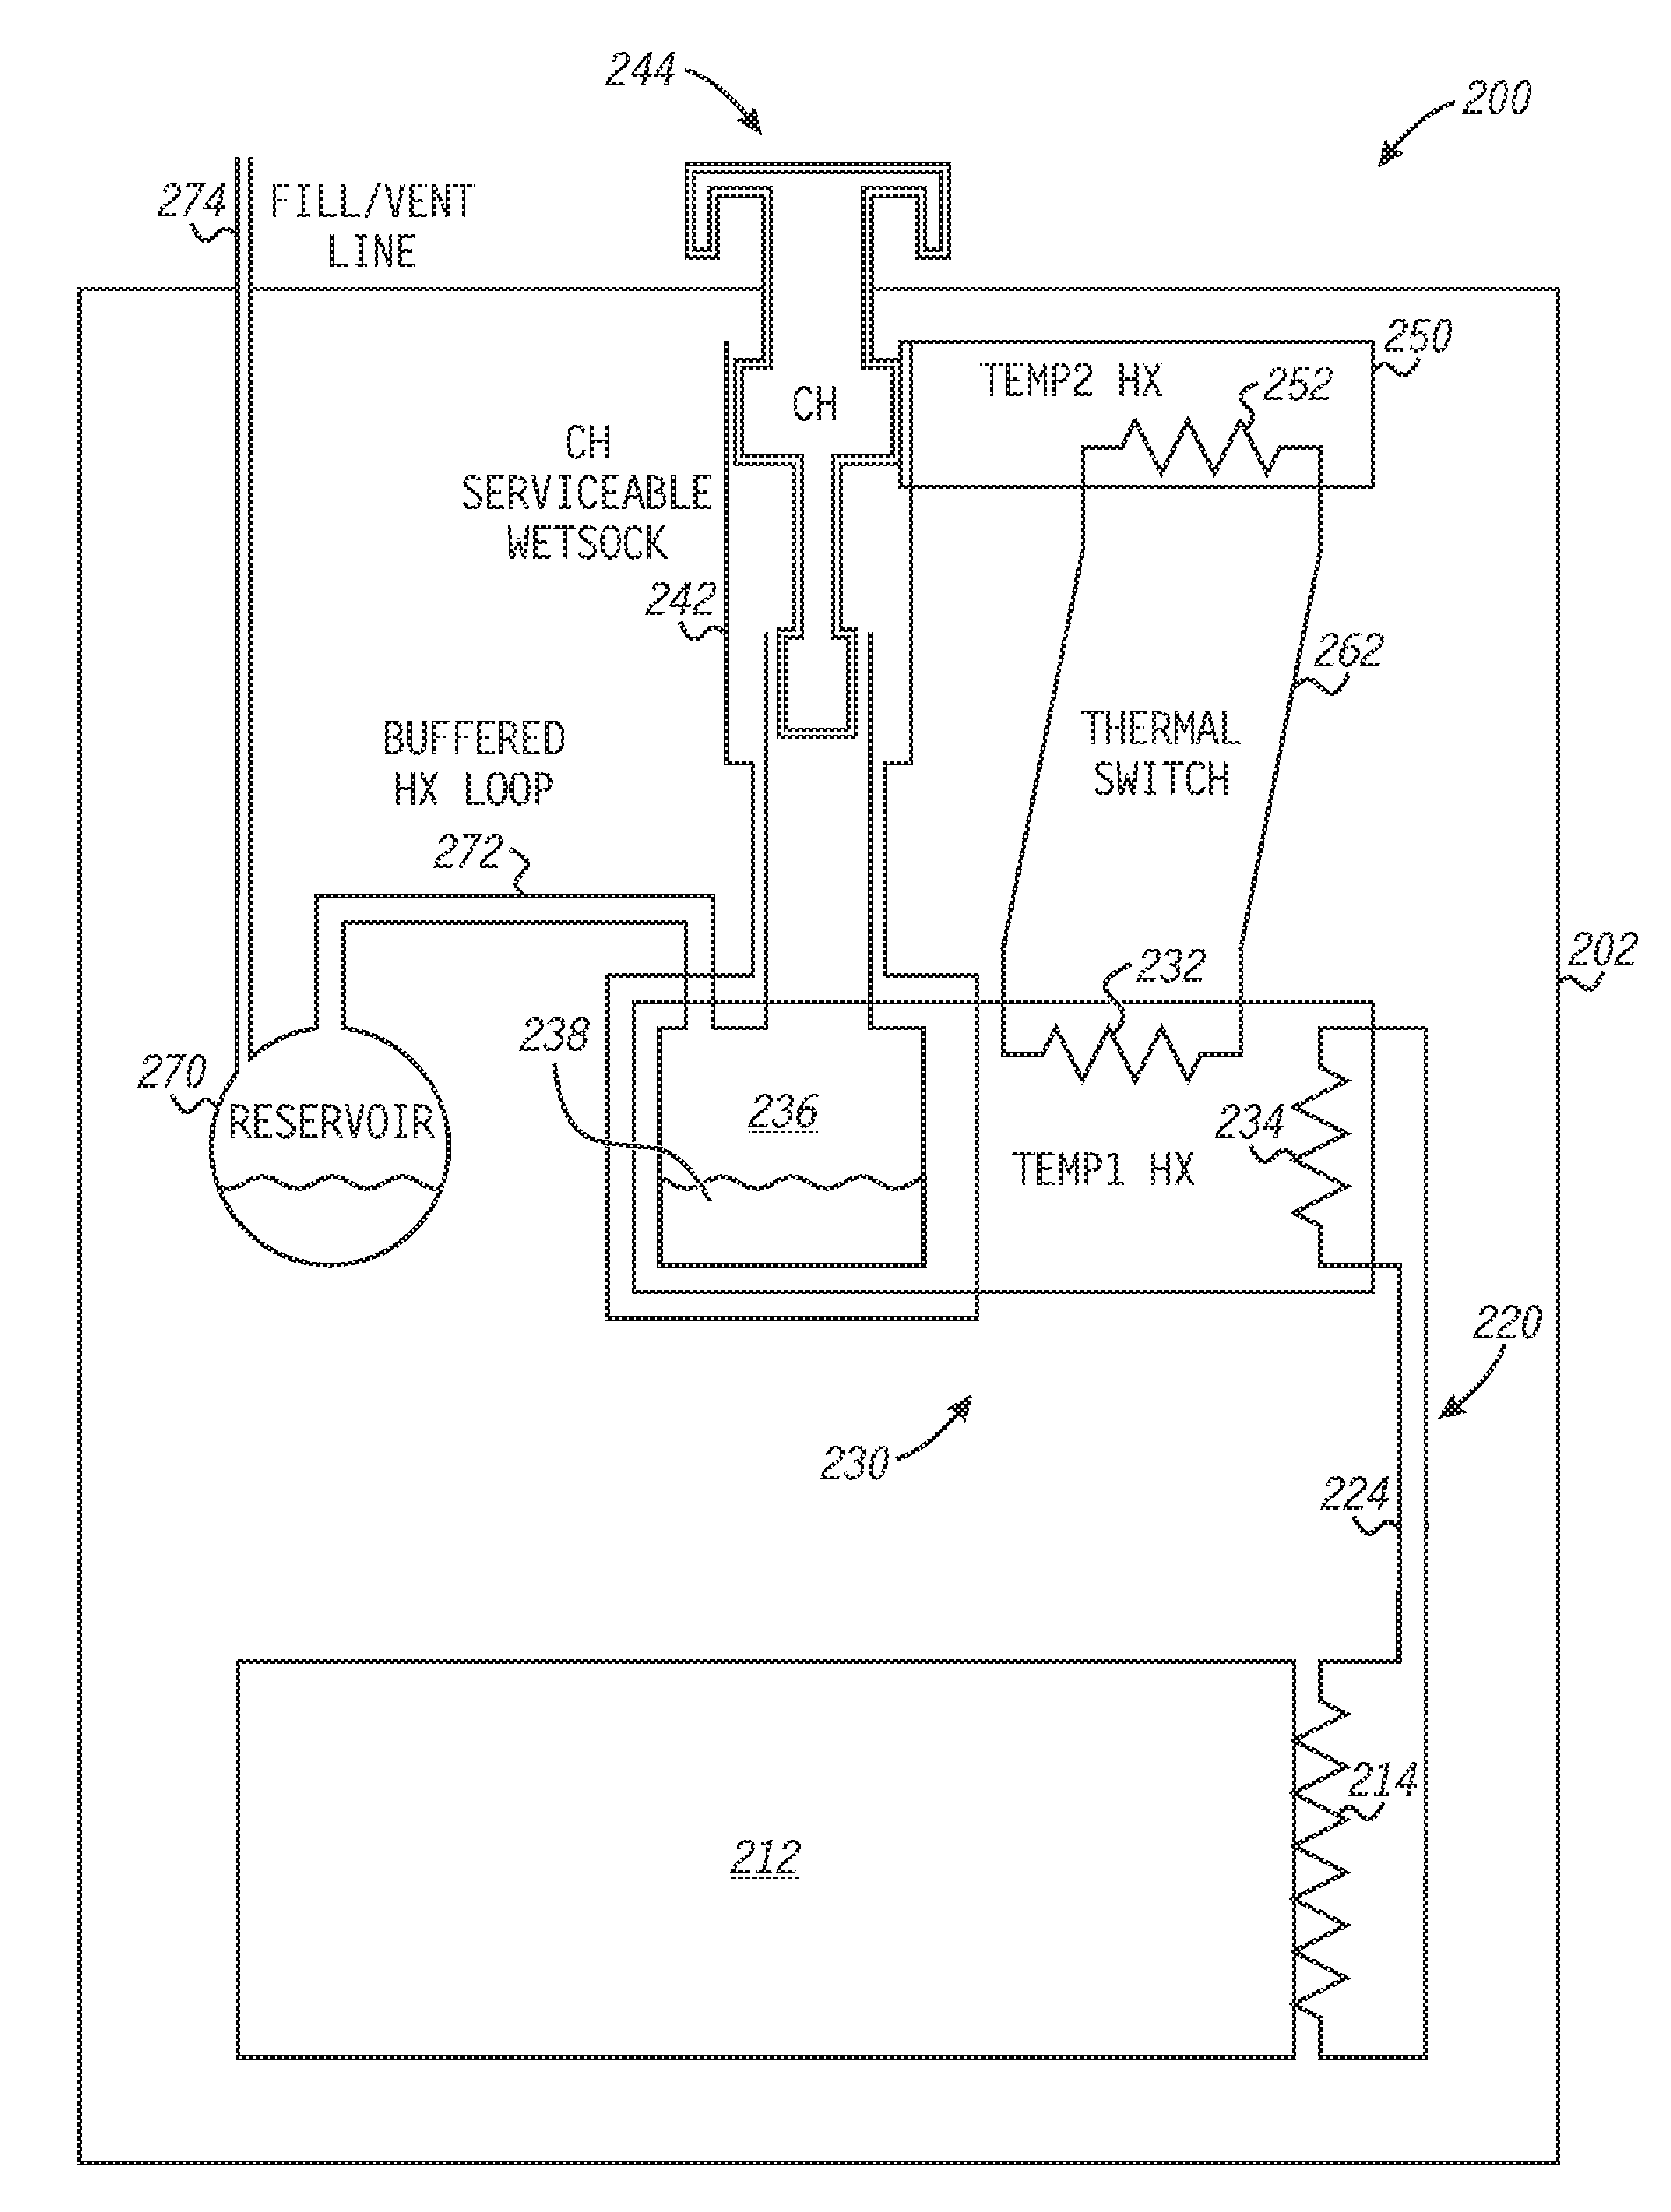 System including a heat exchanger with different cryogenic fluids therein and method of using the same